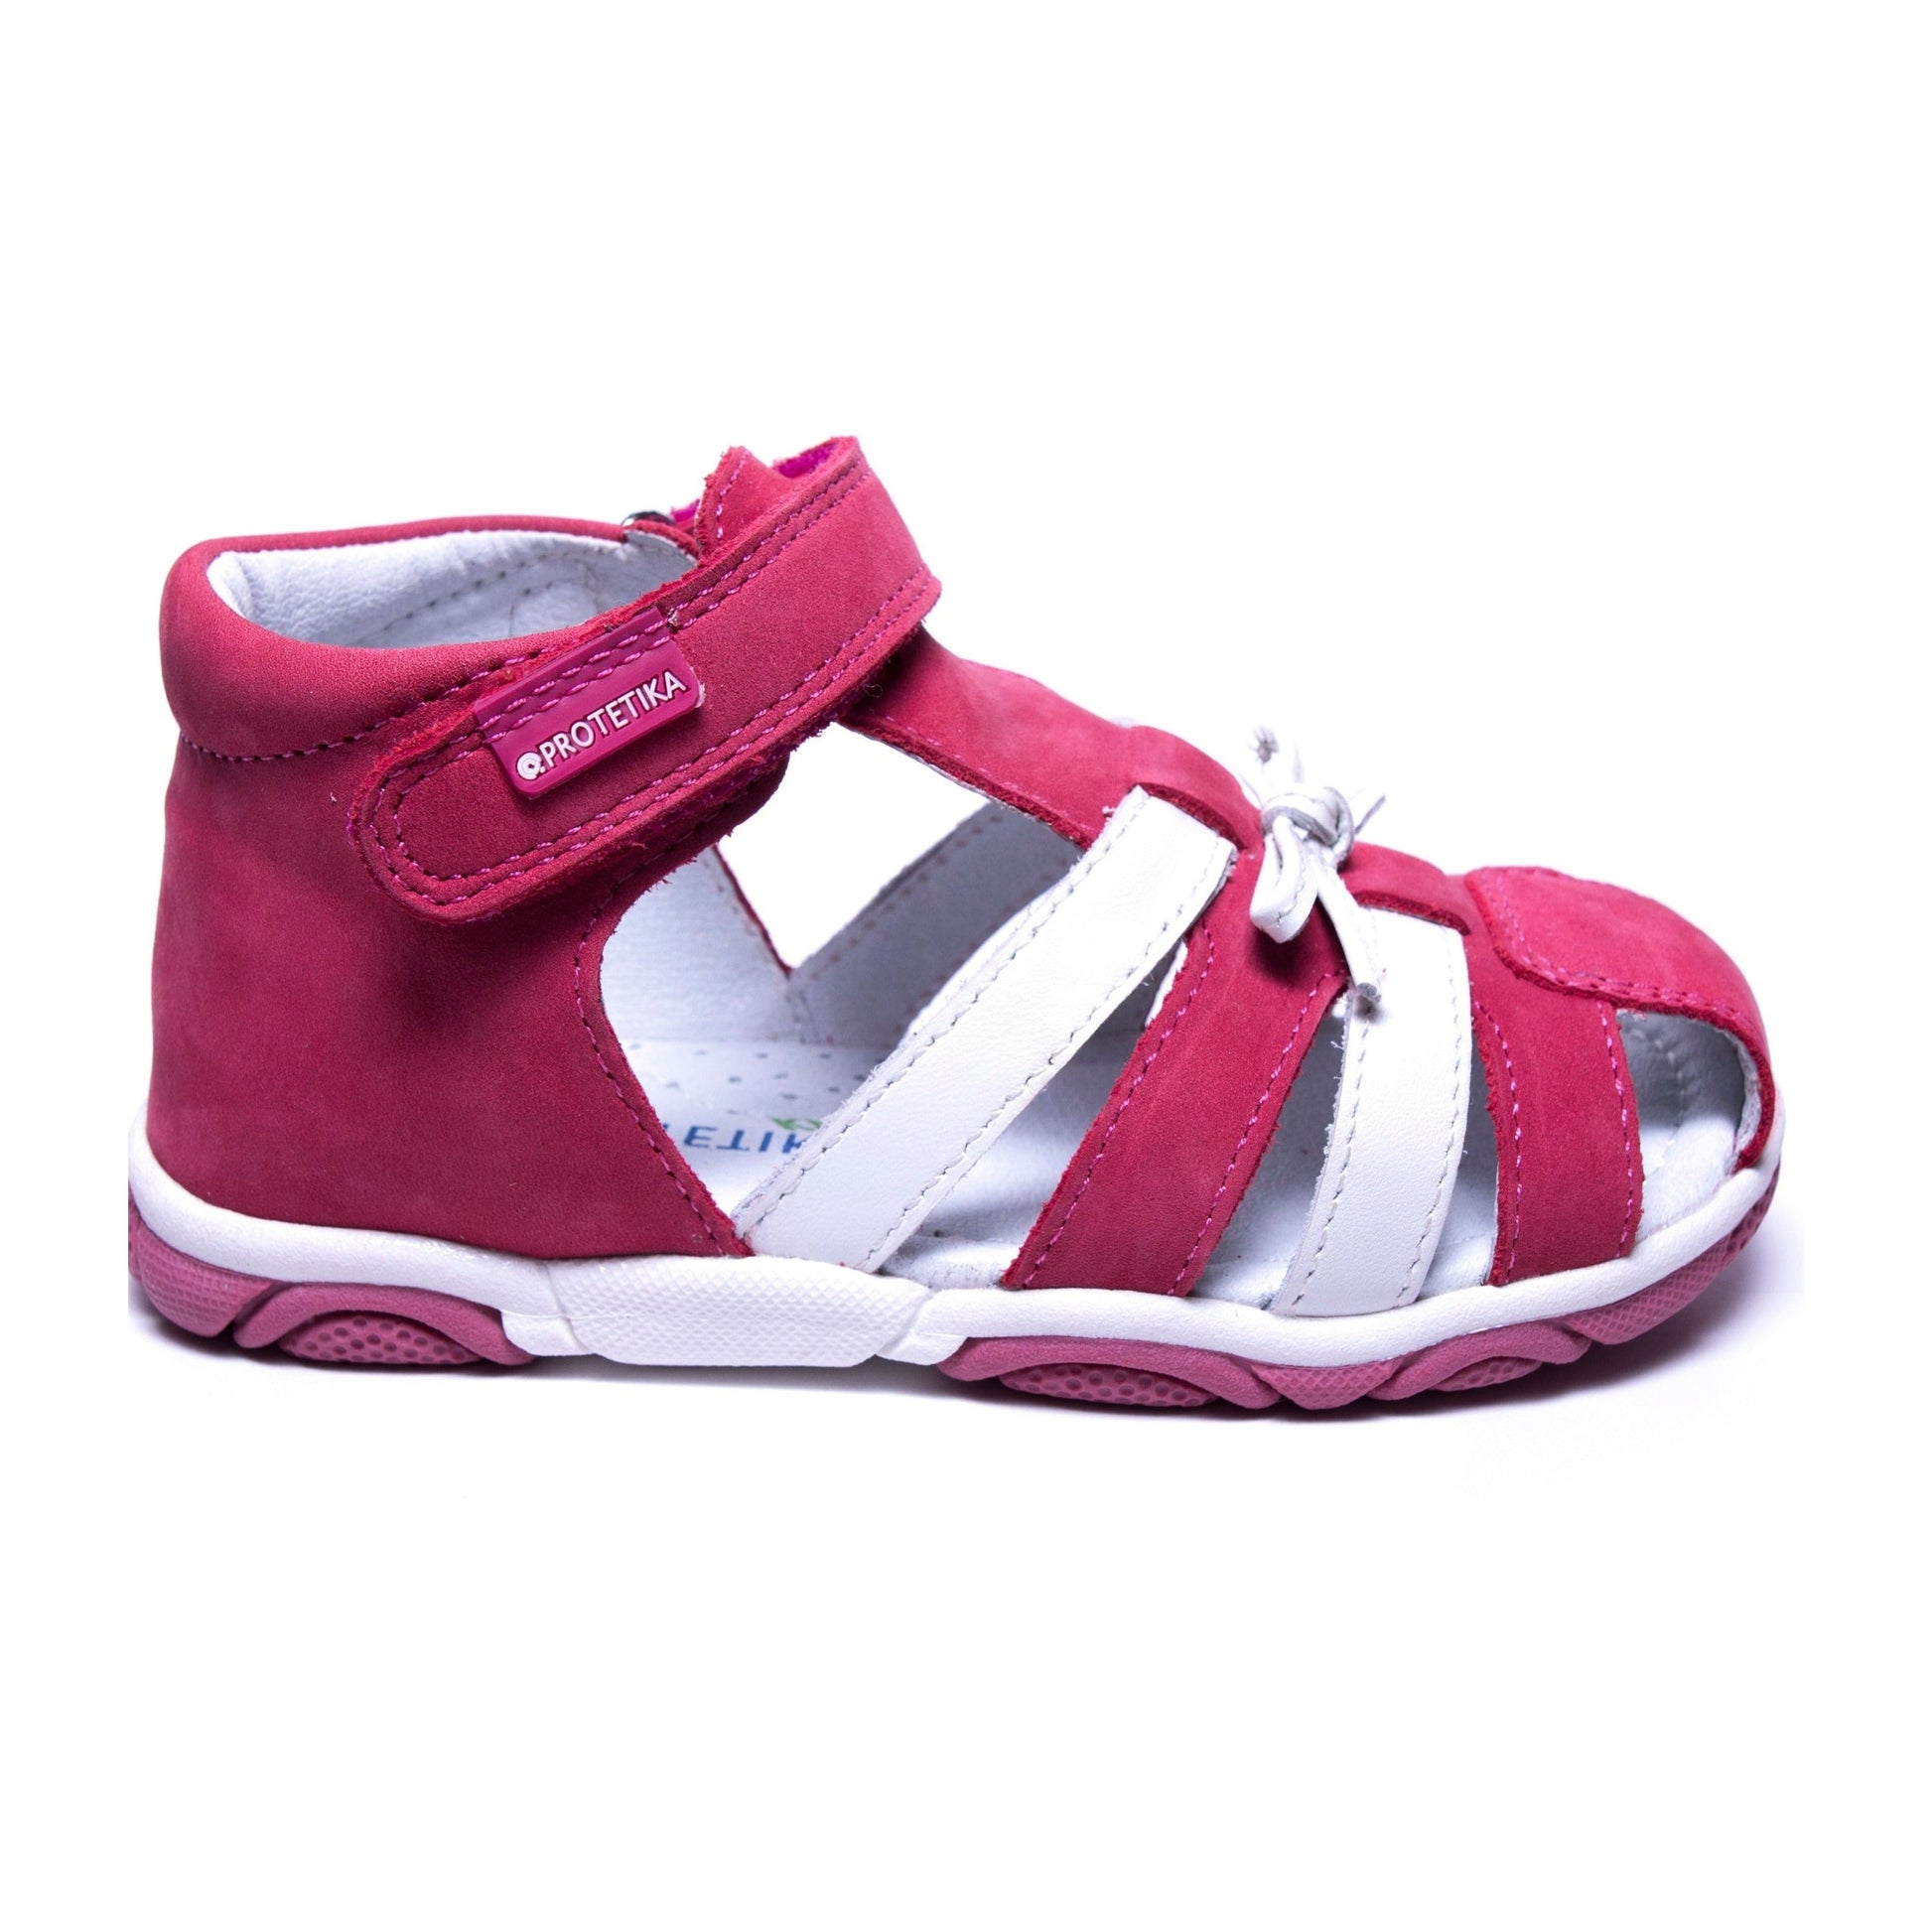 Toddler girls sandal with a mild arch support and a firm and solid heel counter to help keep the heel pointing straight. Suede leather on the upper.